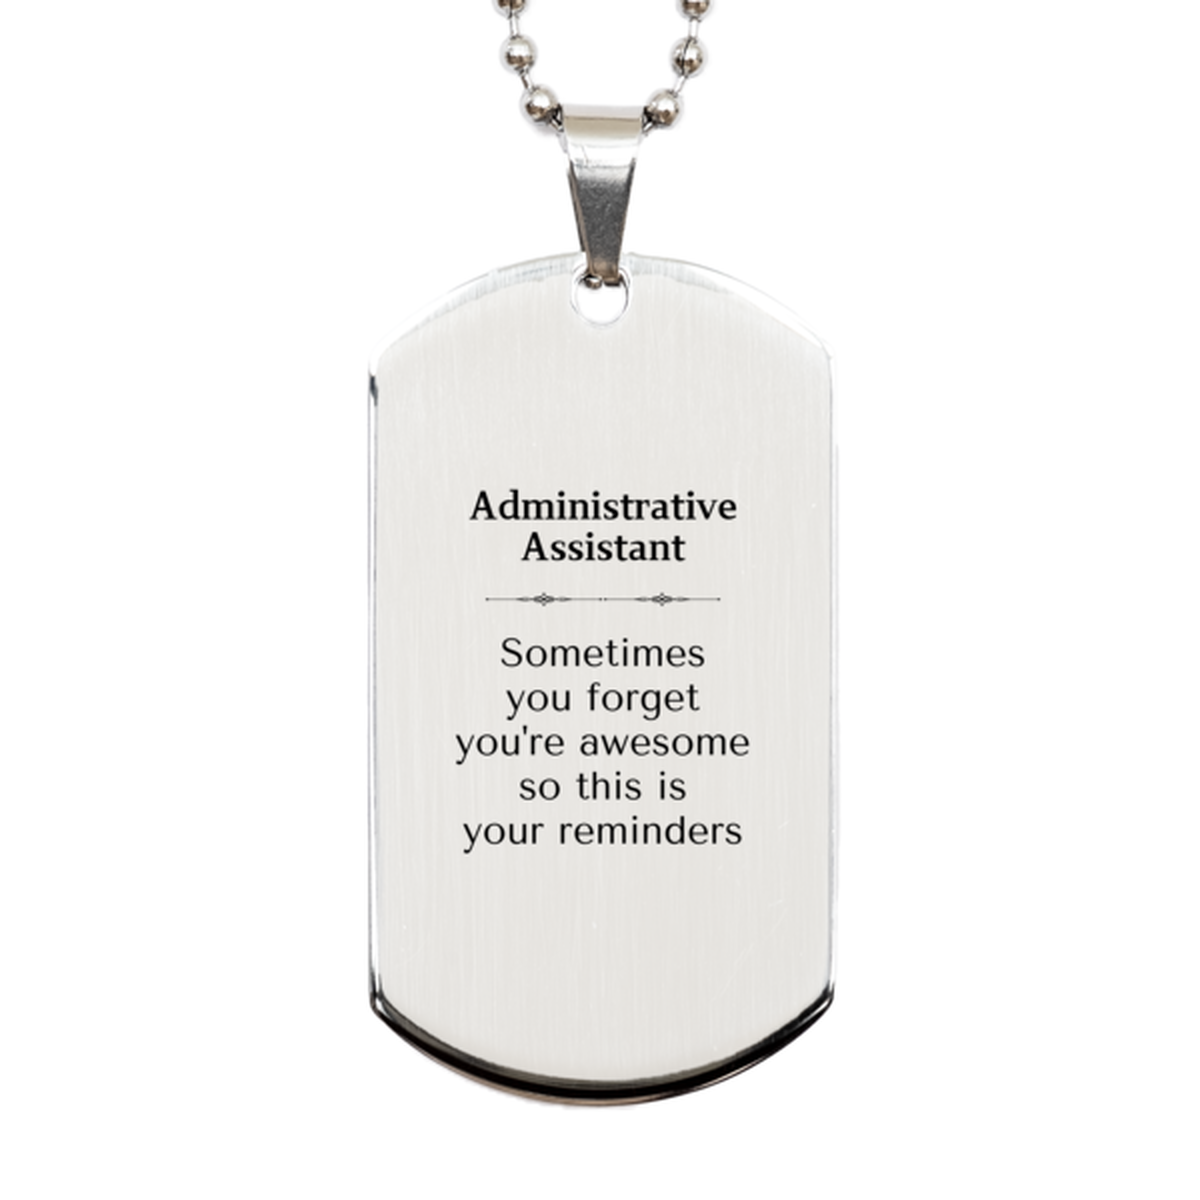 Sentimental Administrative Assistant Silver Dog Tag, Administrative Assistant Sometimes you forget you're awesome so this is your reminders, Graduation Christmas Birthday Gifts for Administrative Assistant, Men, Women, Coworkers